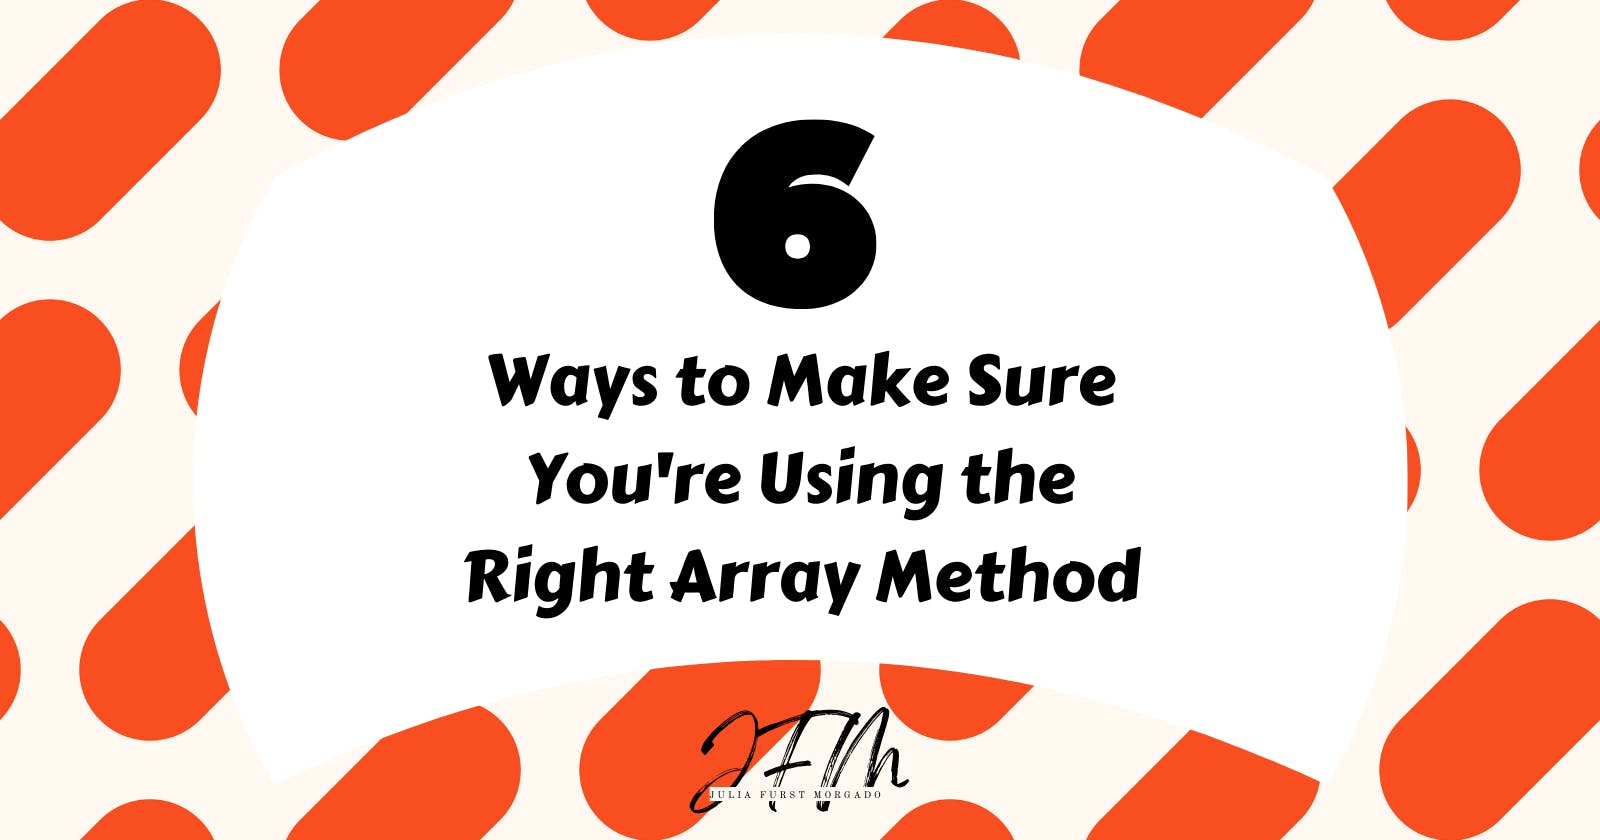 6 Ways to Make Sure You're Using the Right Array Method